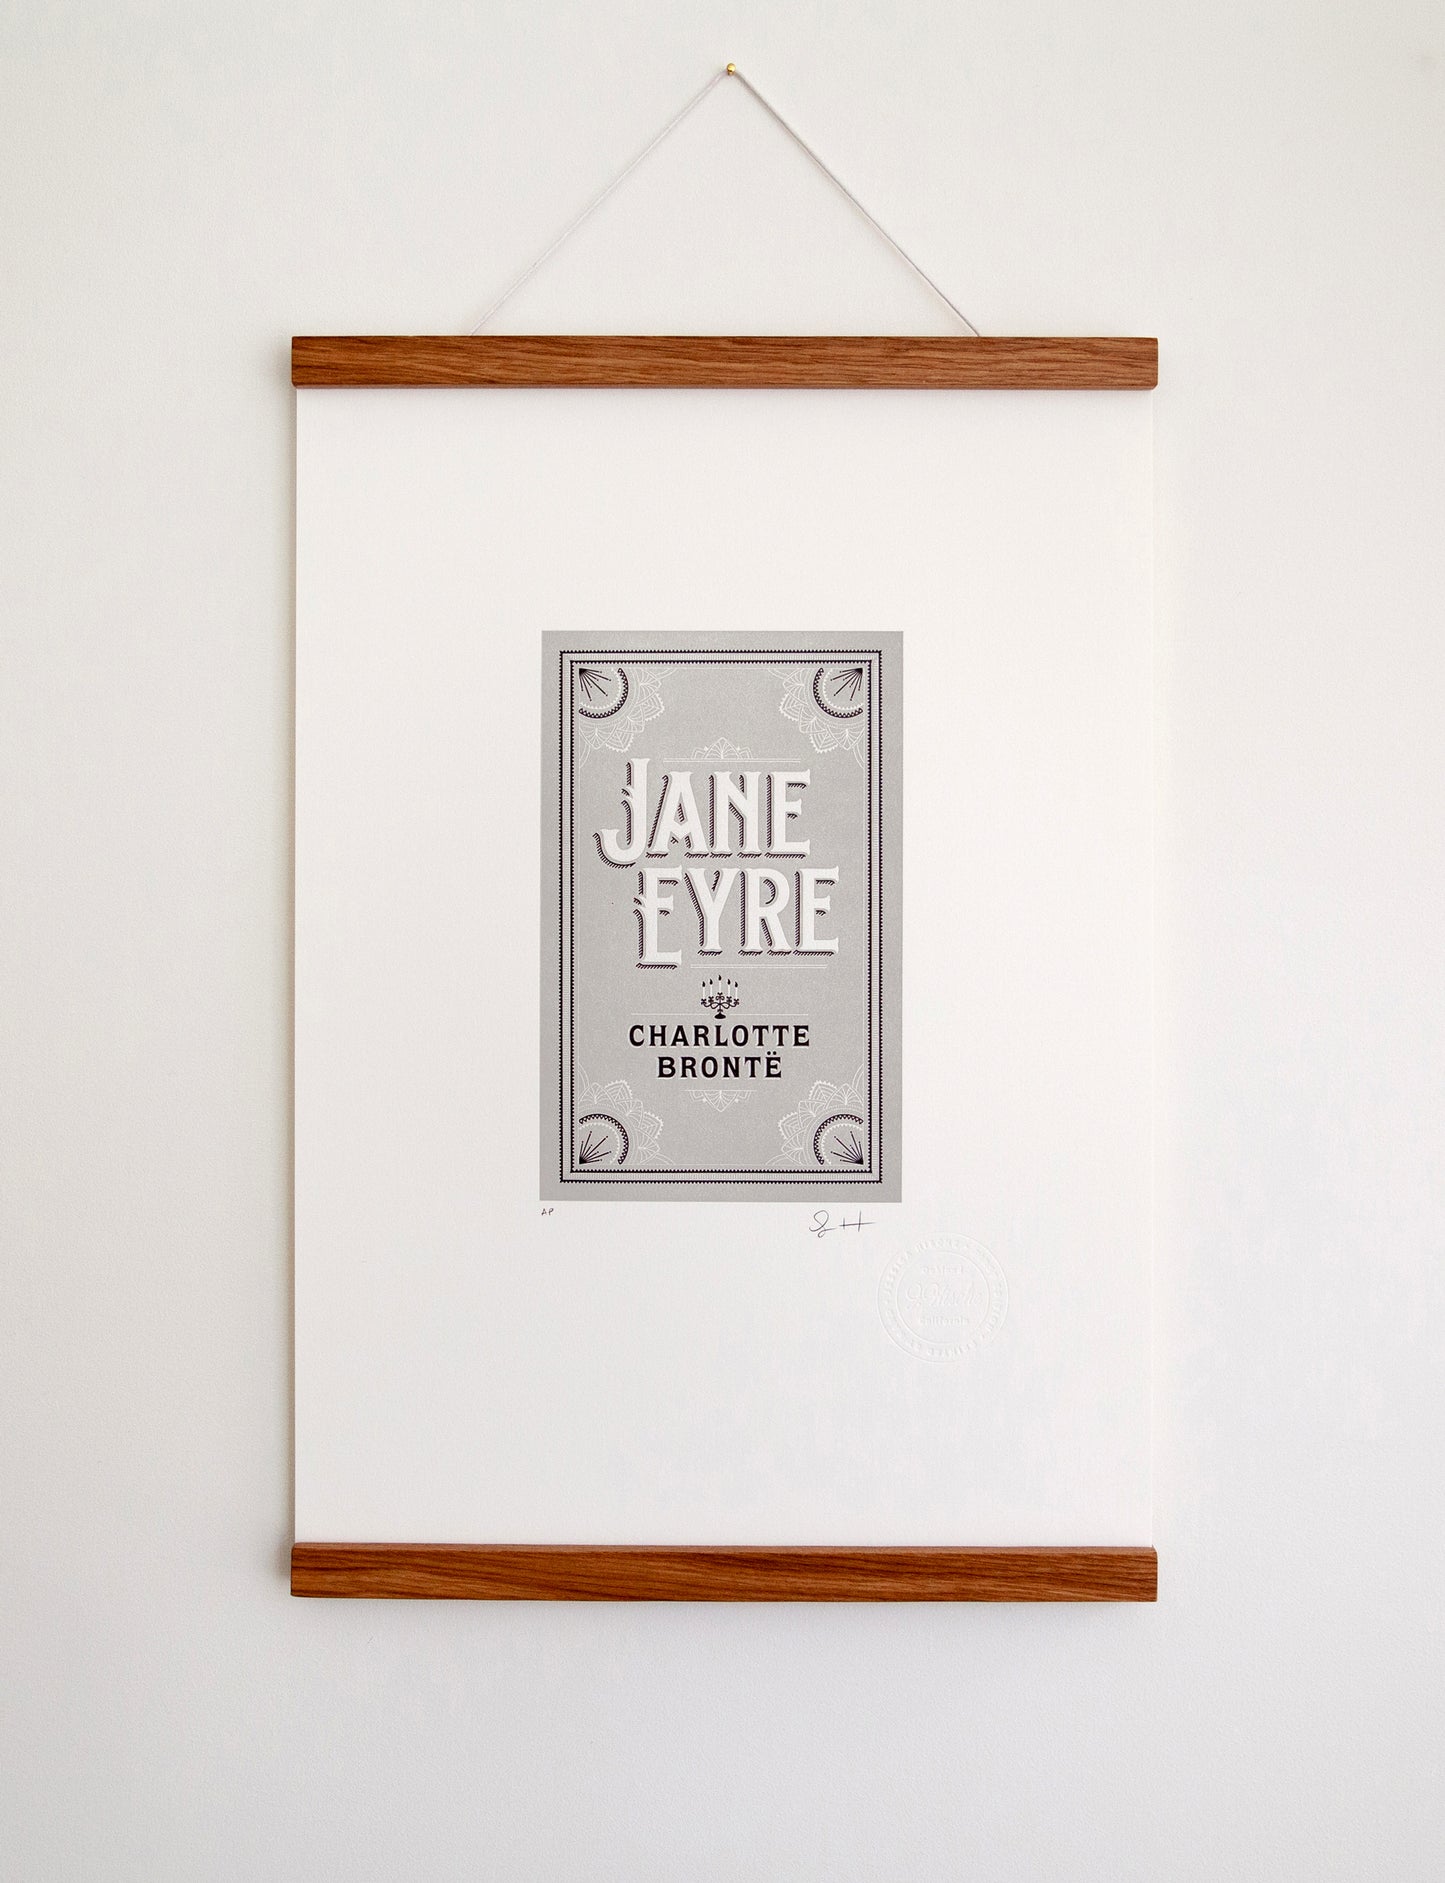 Framed 2-color letterpress print in gray and black. Printed artwork is an illustrated book cover of Jane Eyre including custom hand lettering.